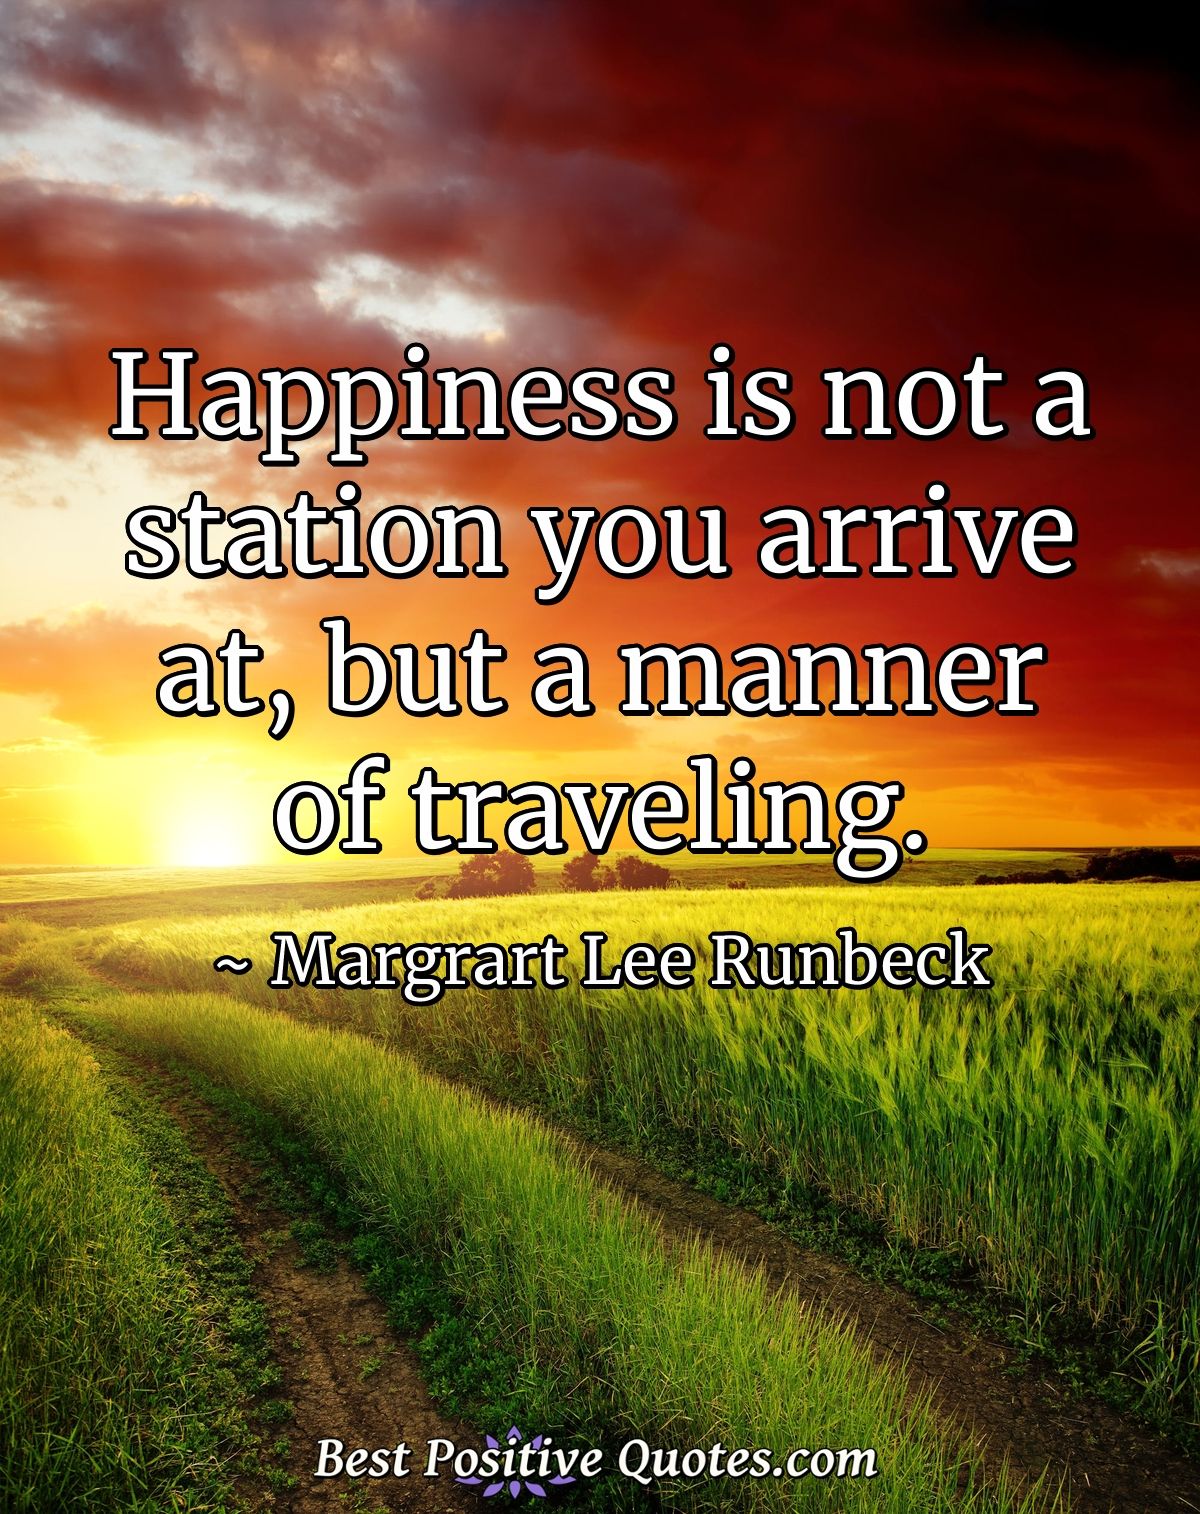 Happiness is not a station you arrive at, but a manner of traveling. - Margrart Lee Runbeck